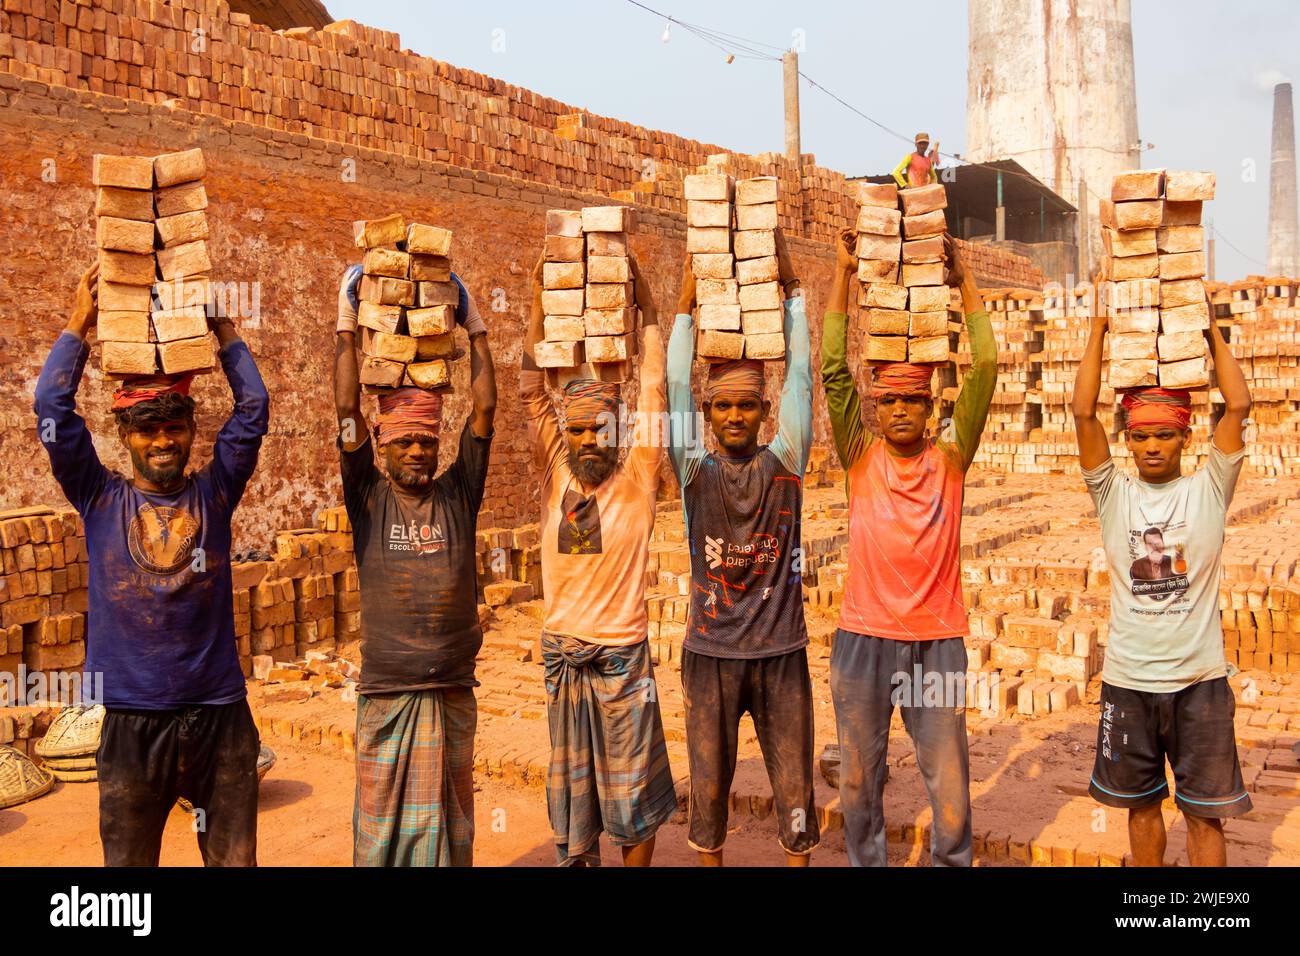 Dhaka, Dhaka, Bangladesh. 15th Feb, 2024. Workers carry piles of bricks weighing more than 20 kg on their heads in a kiln in Dhaka, Bangladesh. The labourers ''“ who are paid less than Â£1 a shift ''“ move up to 2,500 bricks a day in sweltering conditions. Around 4, 00,000 low-income migrants arrive in Dhaka from different parts of the country every year to work at brickfields. Long working hours under the scorching sun in the brick fields, massive accumulation of dust, the risk of falling from the trucks and piles of bricks, and carrying excessive loads pose serious health hazards for the w Stock Photo